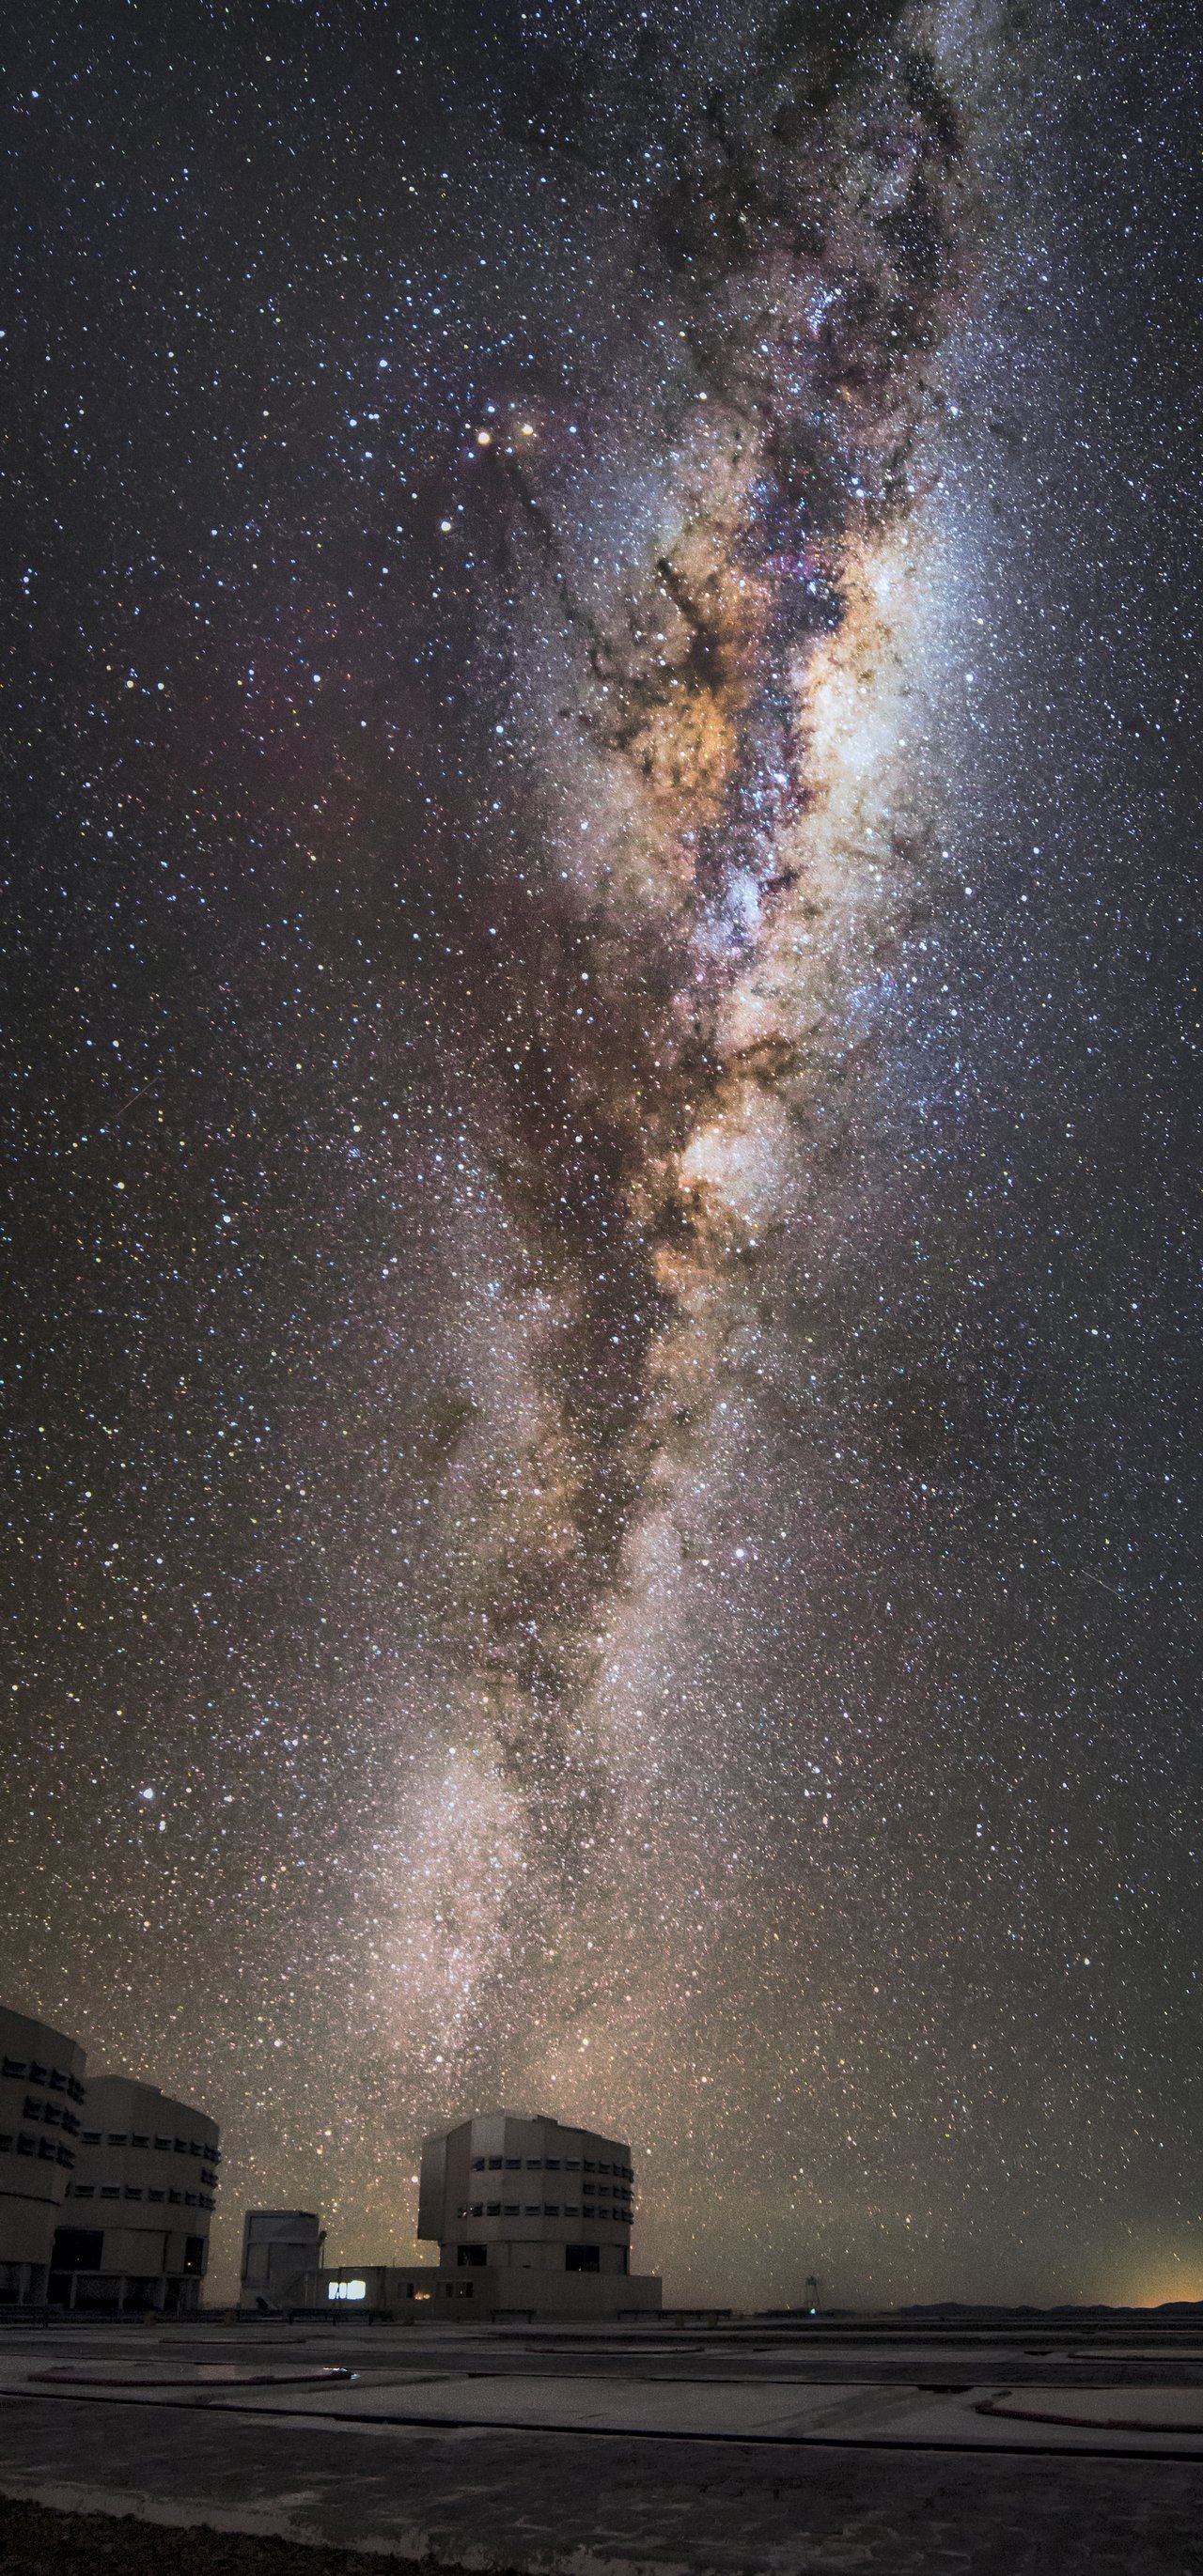 Our gleaming Milky Way